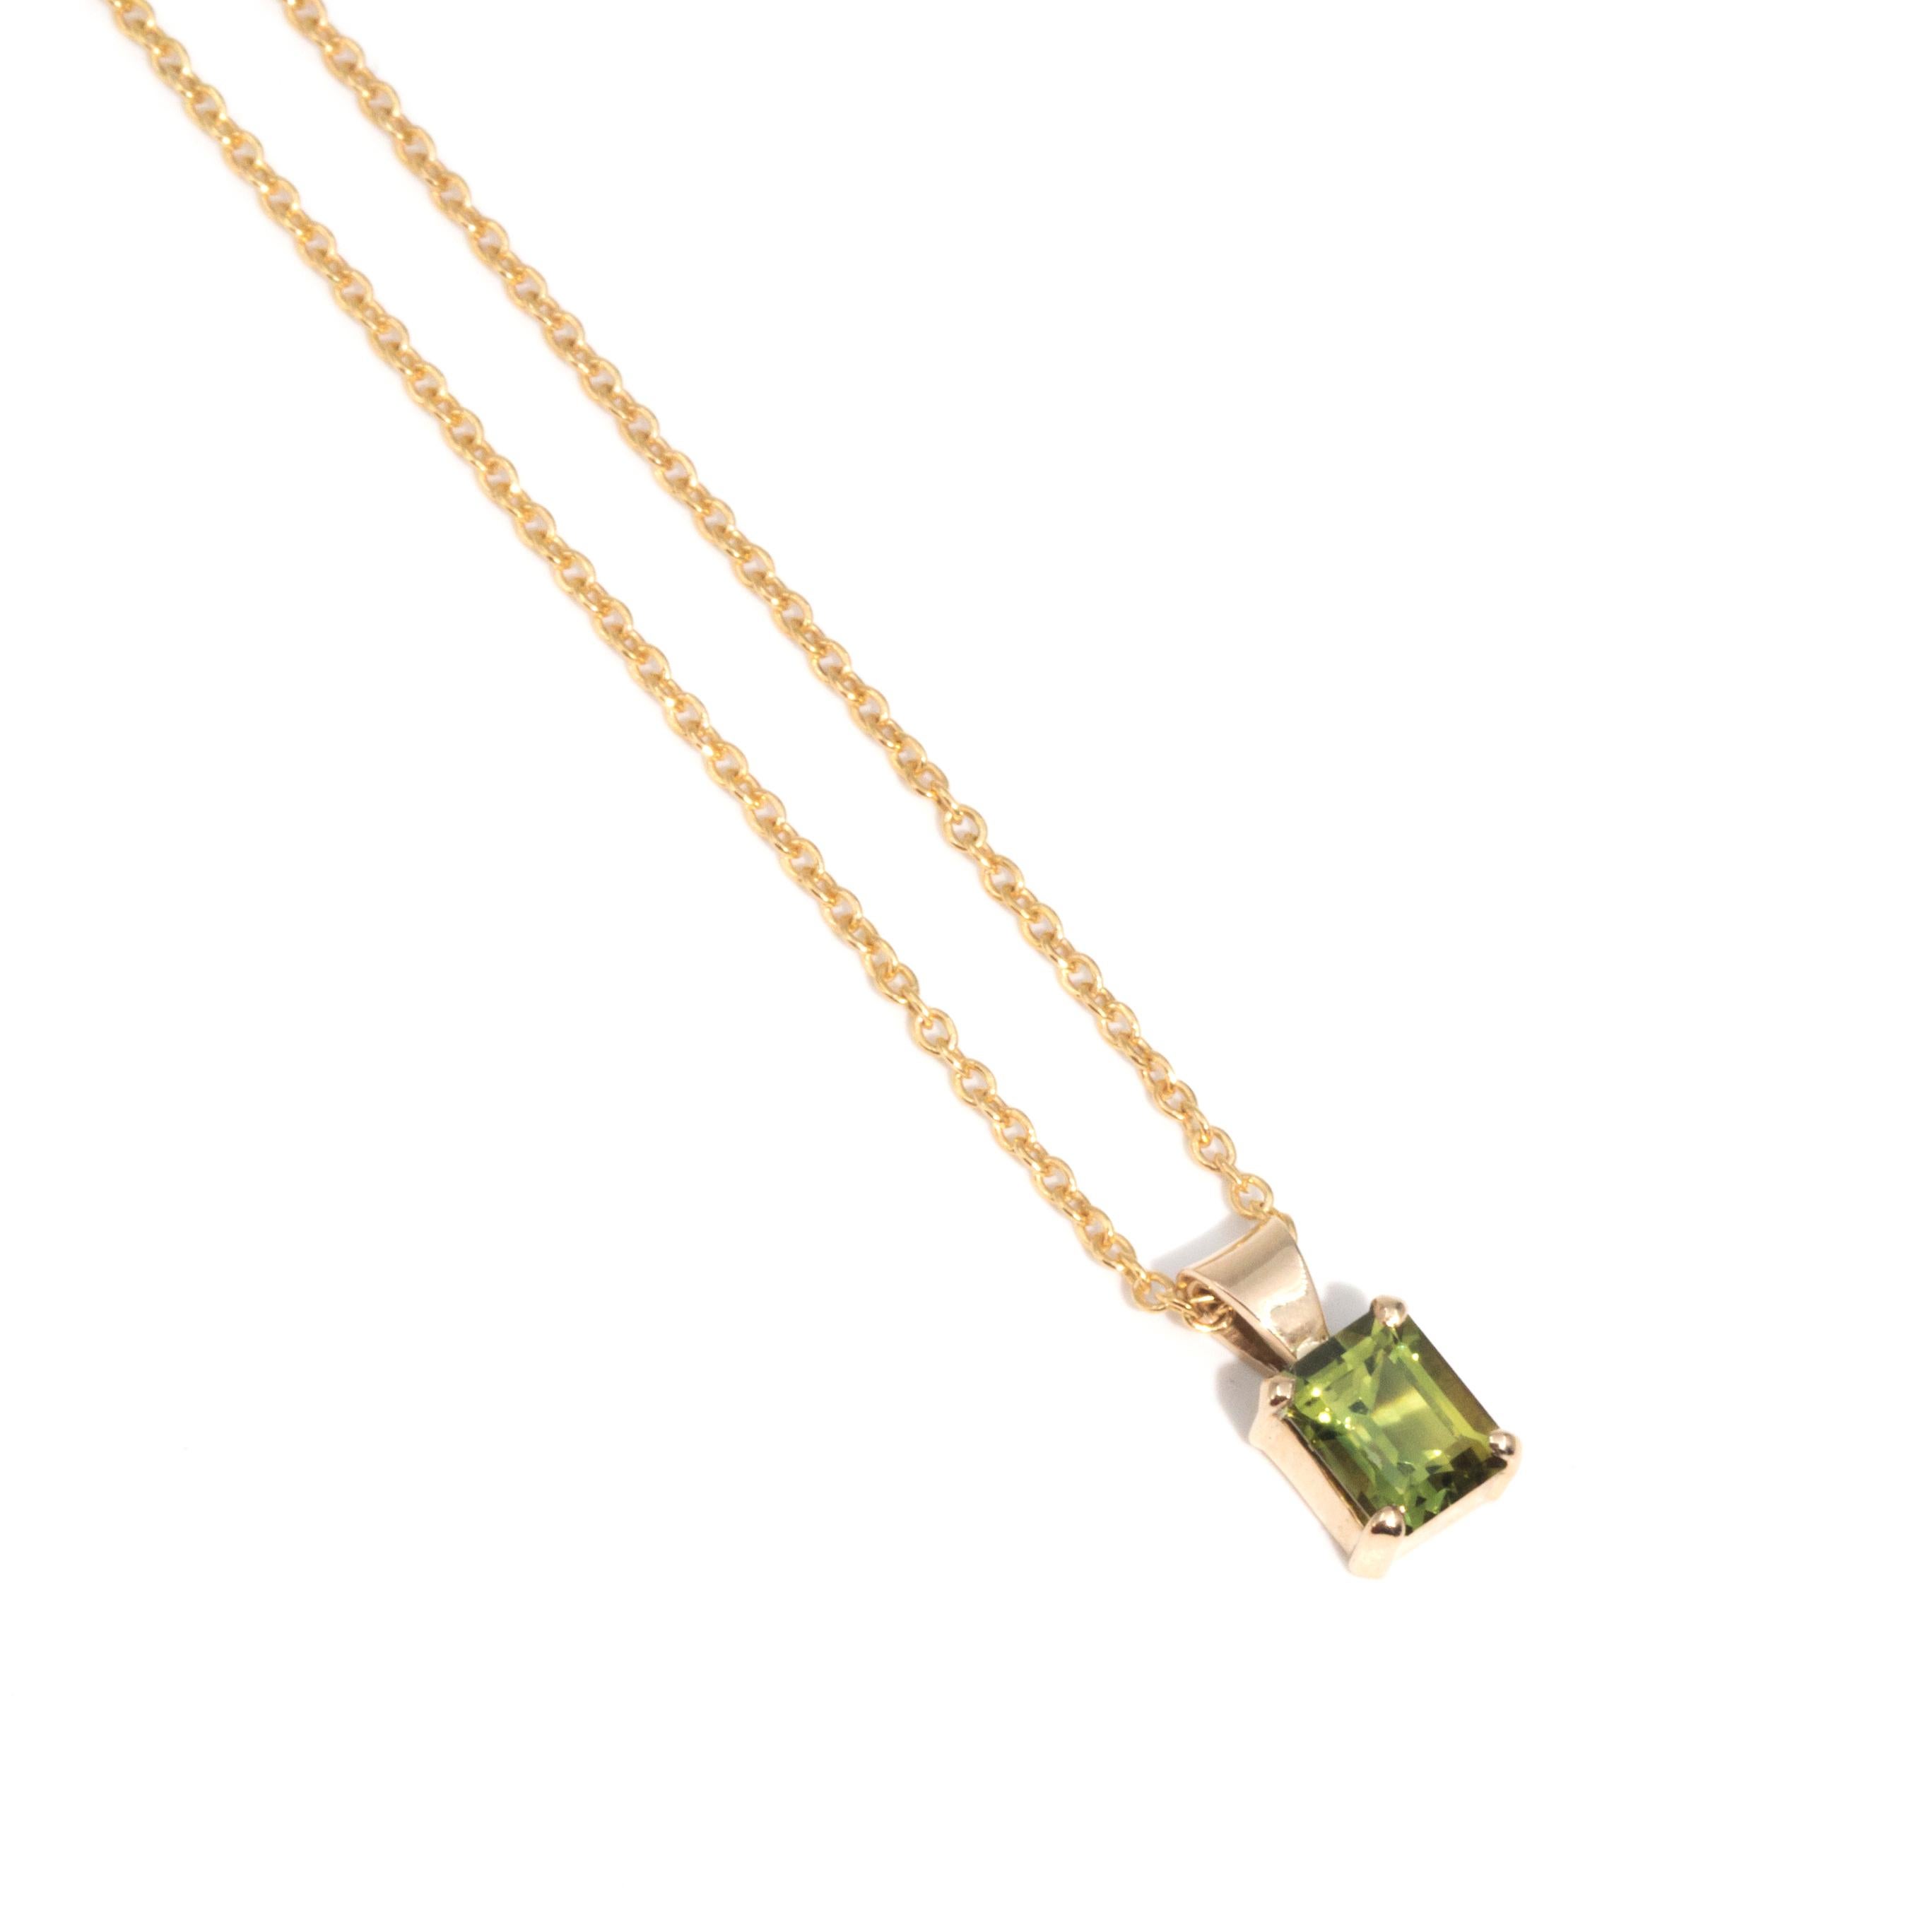 Crafted in 9 carat yellow gold, this charming vintage pendant features an alluring bright green emerald cut sapphire resting in an elegant four claw setting. The pendant is threaded on a fine 9 carat yellow gold cable chain. We have named this jewel